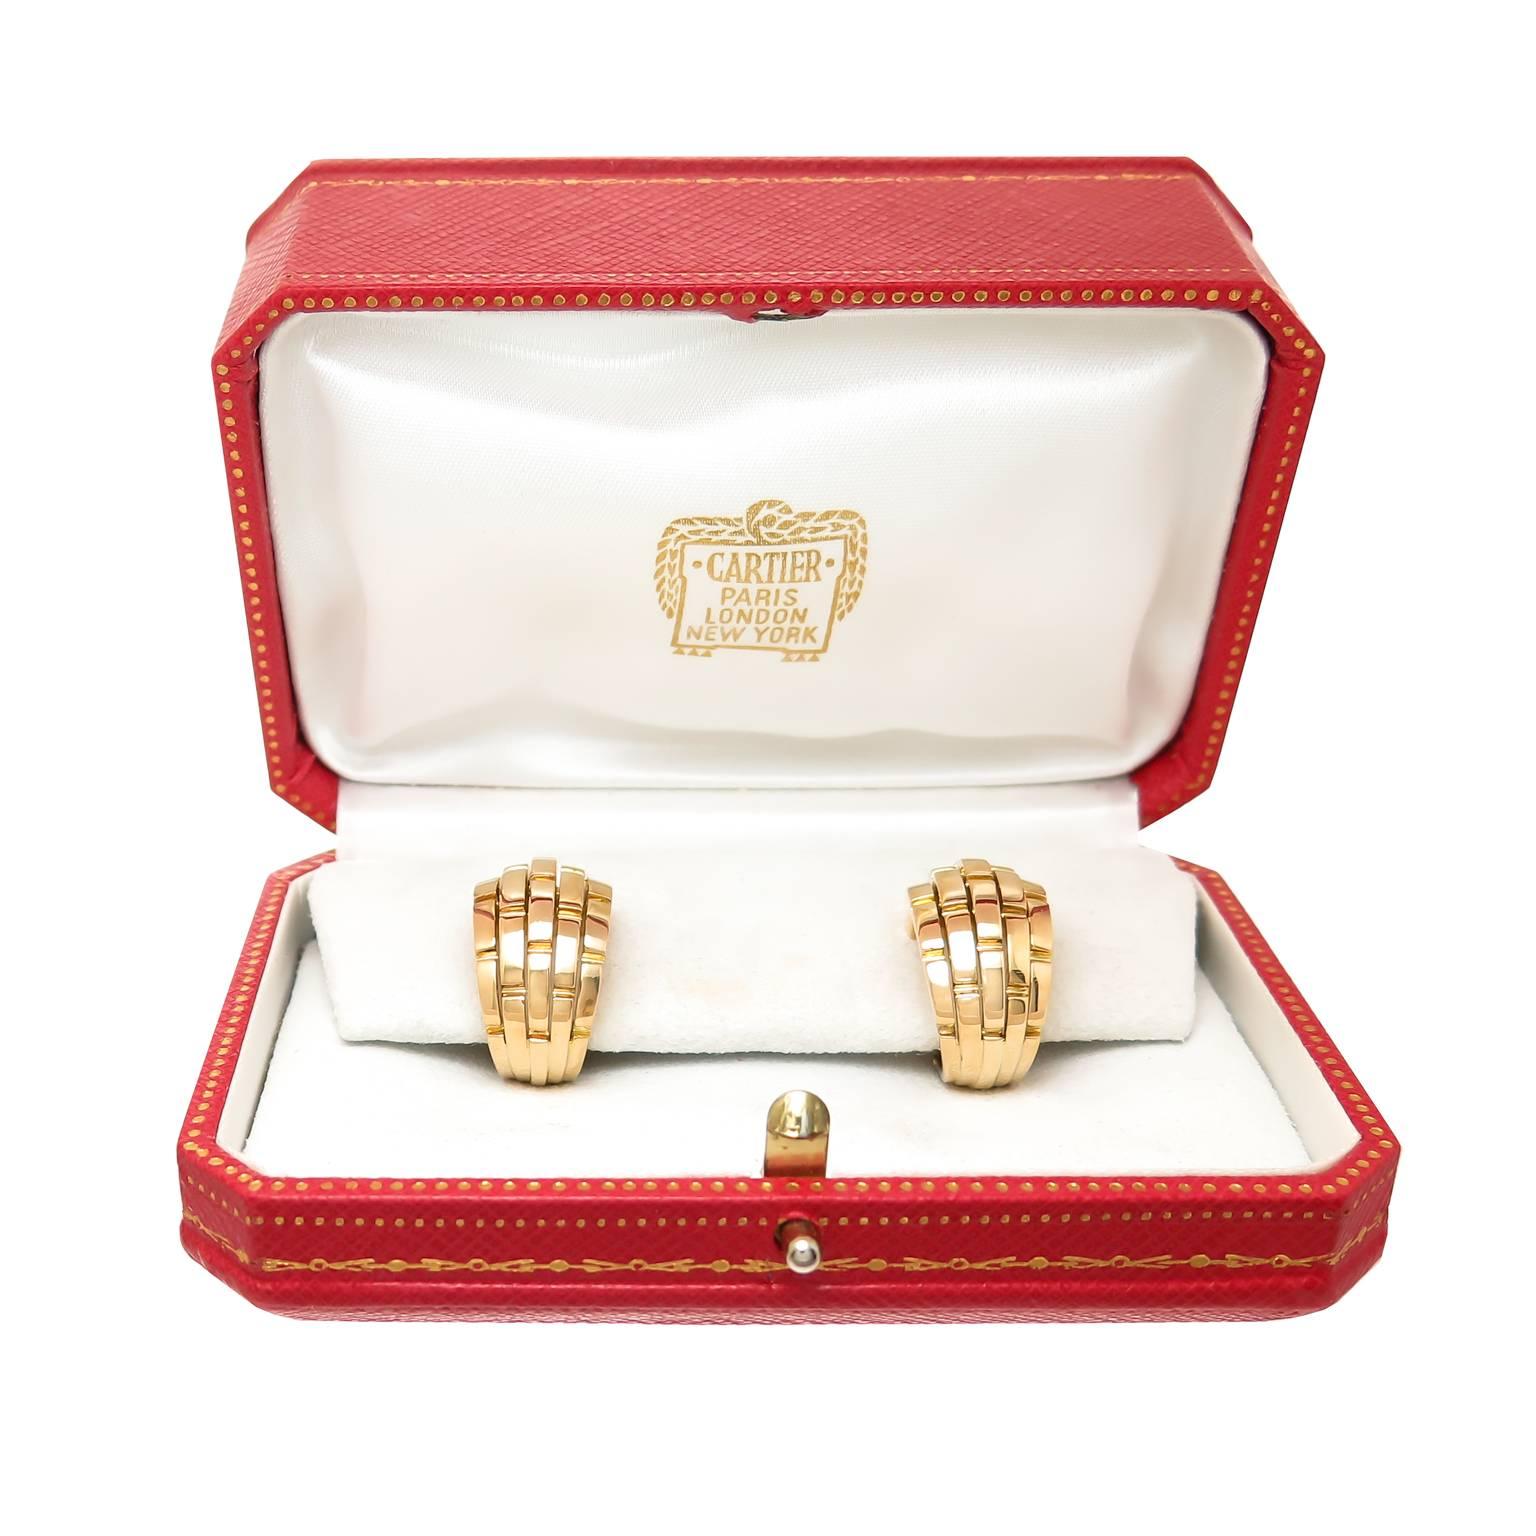 Circa 2010 Cartier 18K yellow Gold Maillon Panthere collection Earrings, measuring 7/8 inch in length and 1/2 inch wide. Solid, good weight construction and having a clip backing to which posts can be easily if desired. Signed and numbered and come